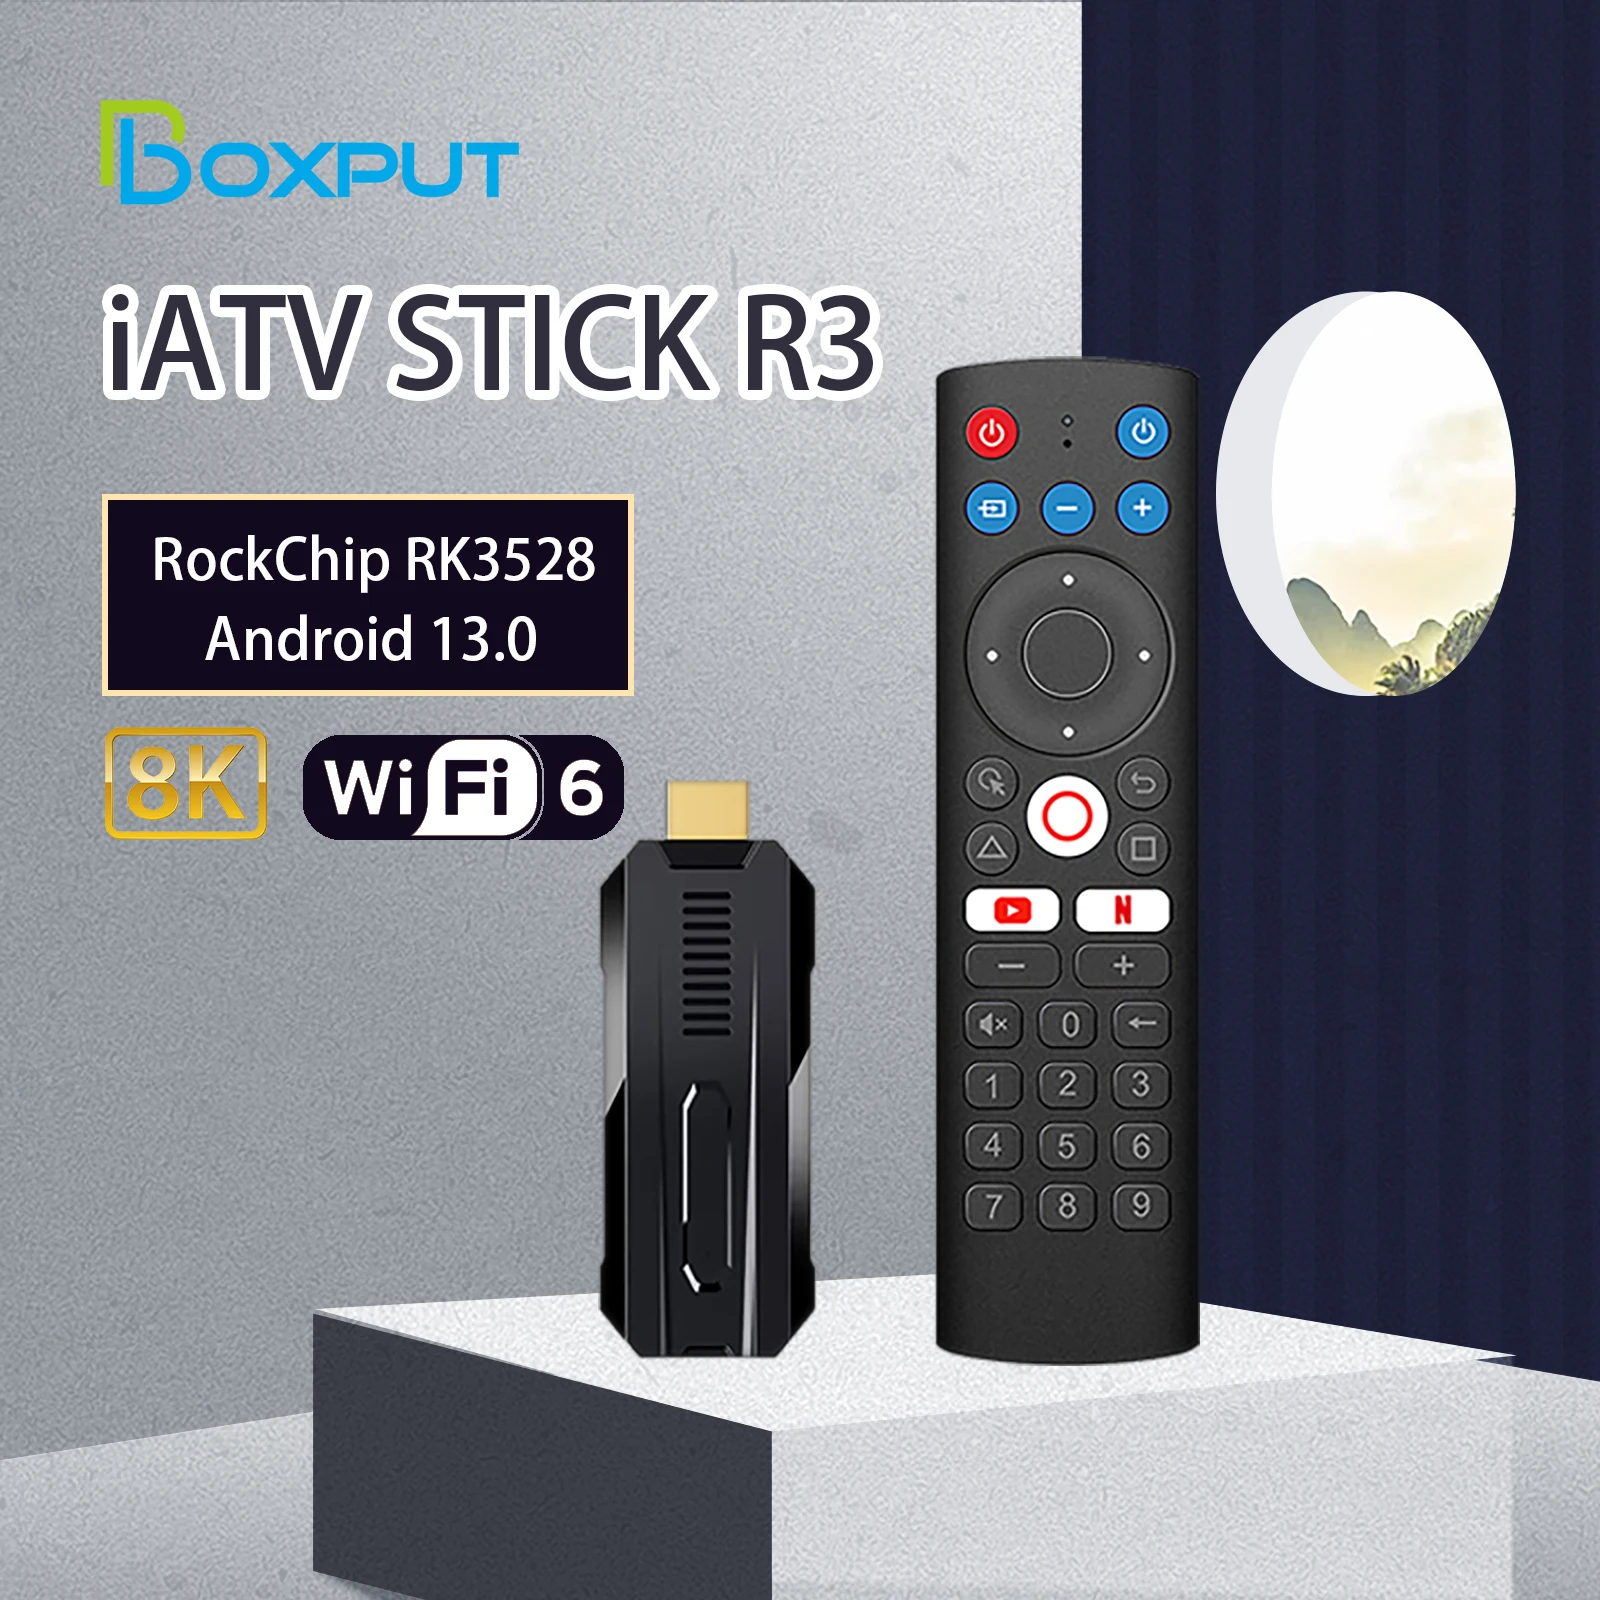 BOXPUT Android 13.0 iATV R3 Fire TV Stick RockChip RK3528 8K Portable TVbox 2.4G/5G WiFi6 BT5.0 OTG TF Slot With Screencasting vissko flame aroma diffuser 130ml essential oil diffusers usb portable air humidifier with color night light realistic fire